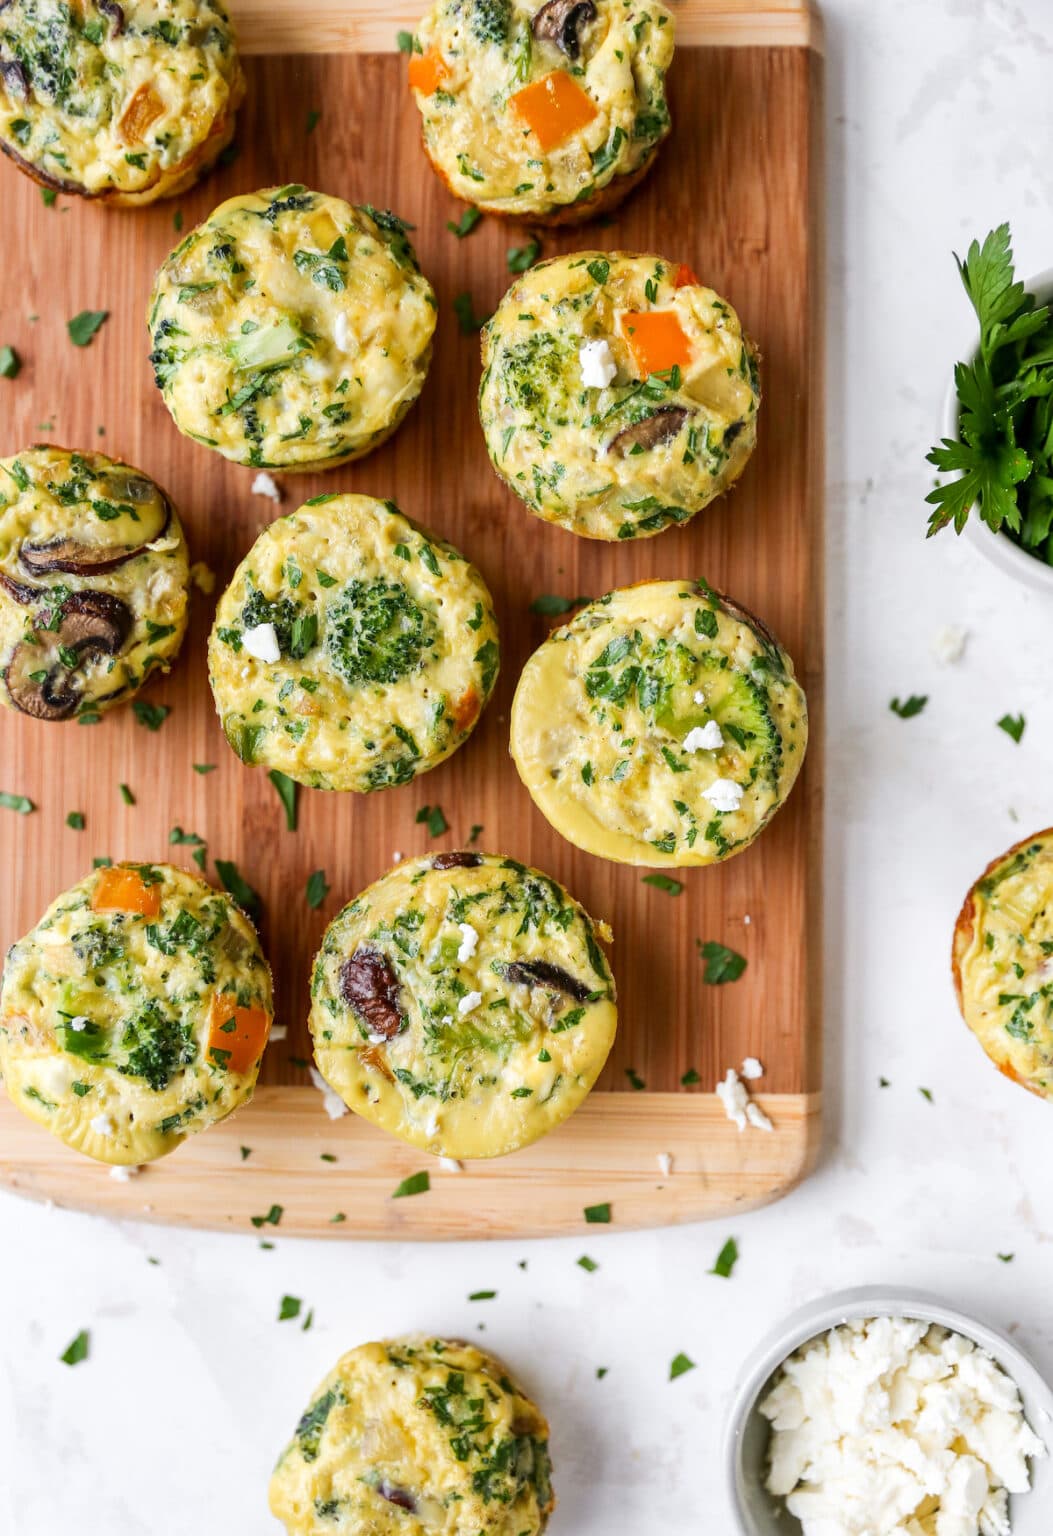 Healthy Baked Egg Muffins - Keto Snack Recipes